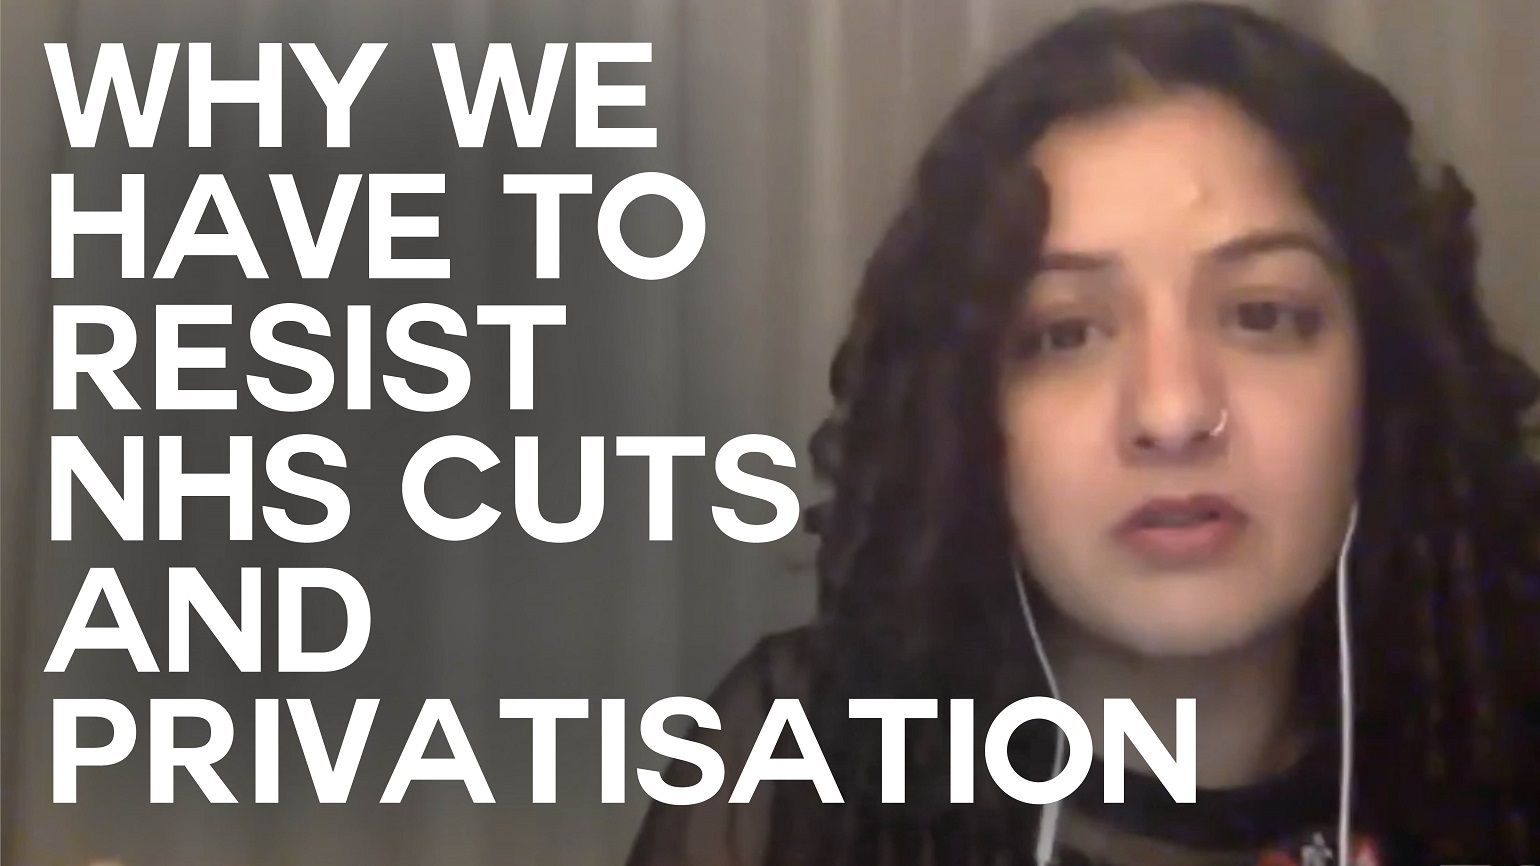 A still of an interview with Alia Butt with text reading "Why we have to resist NHS cuts and privatisation"